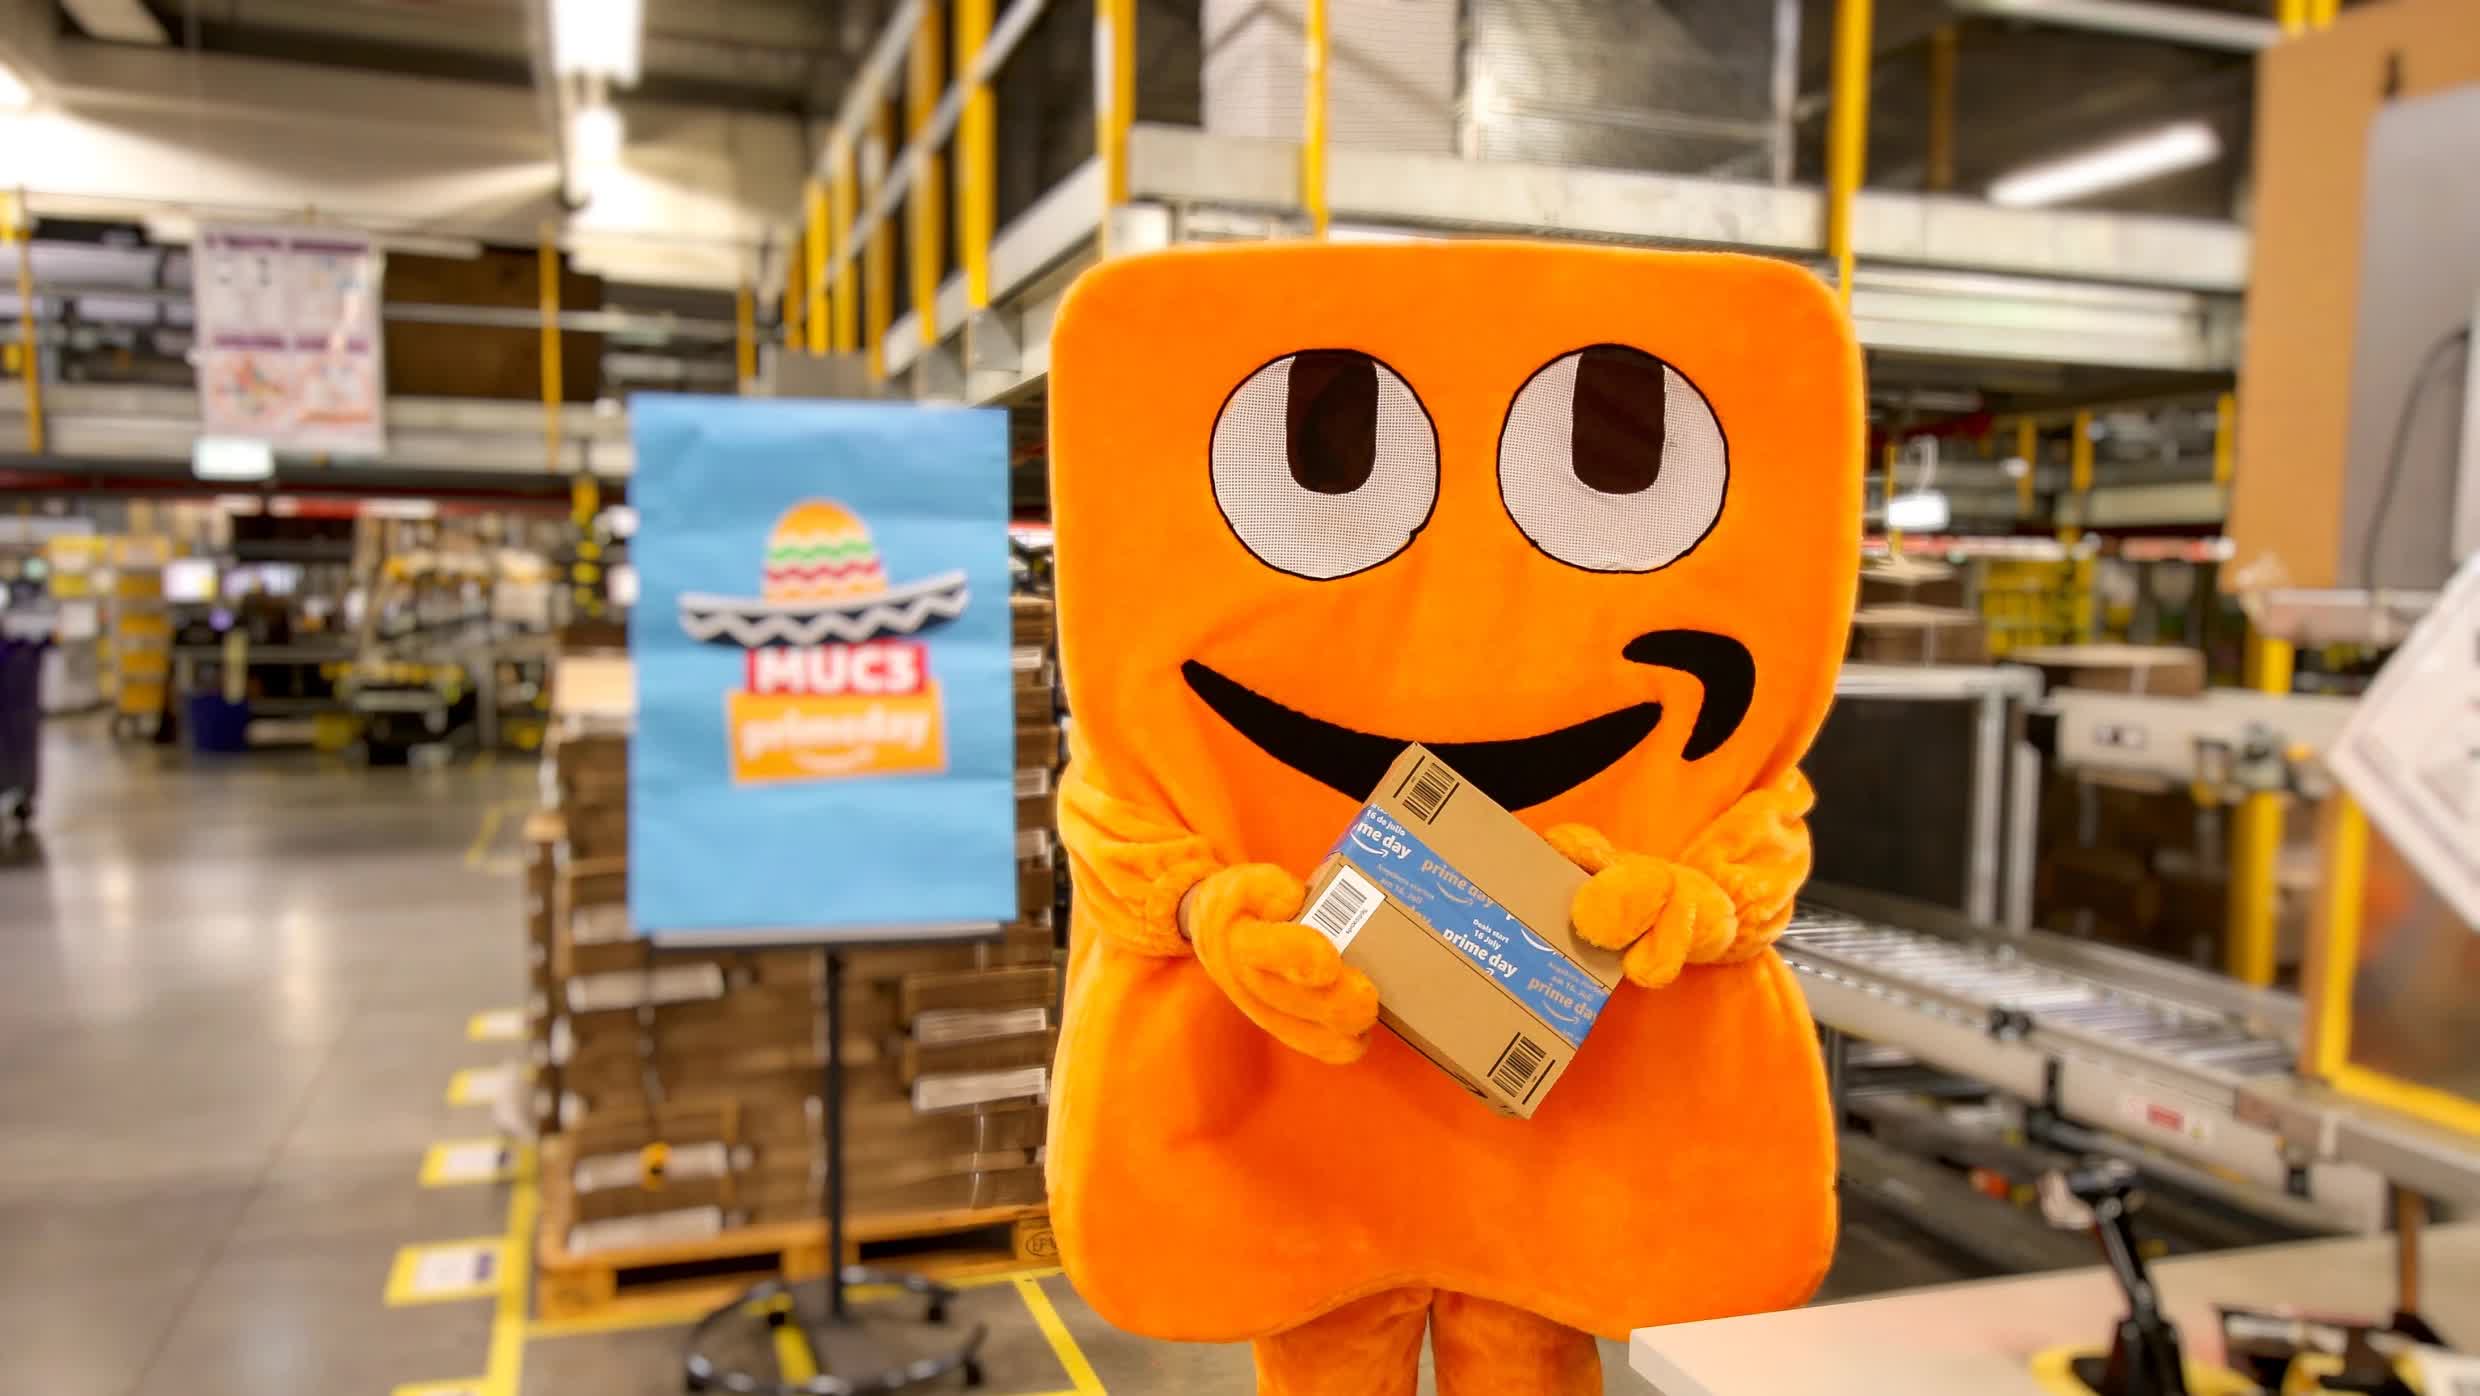 Amazon employees encouraged to ask company mascot for help with financial hardships